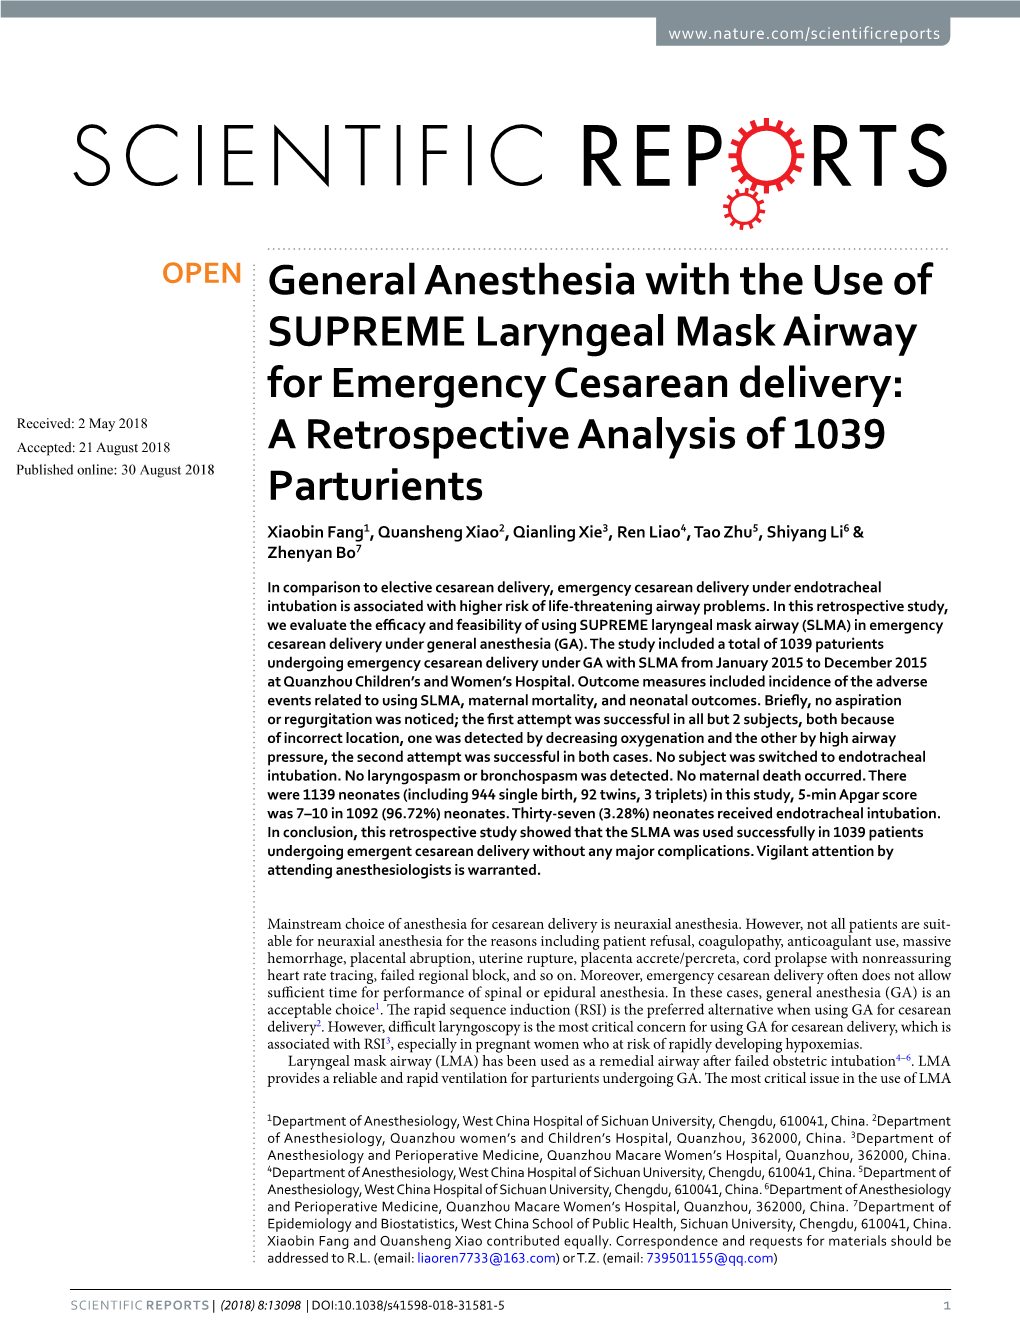 General Anesthesia with the Use of SUPREME Laryngeal